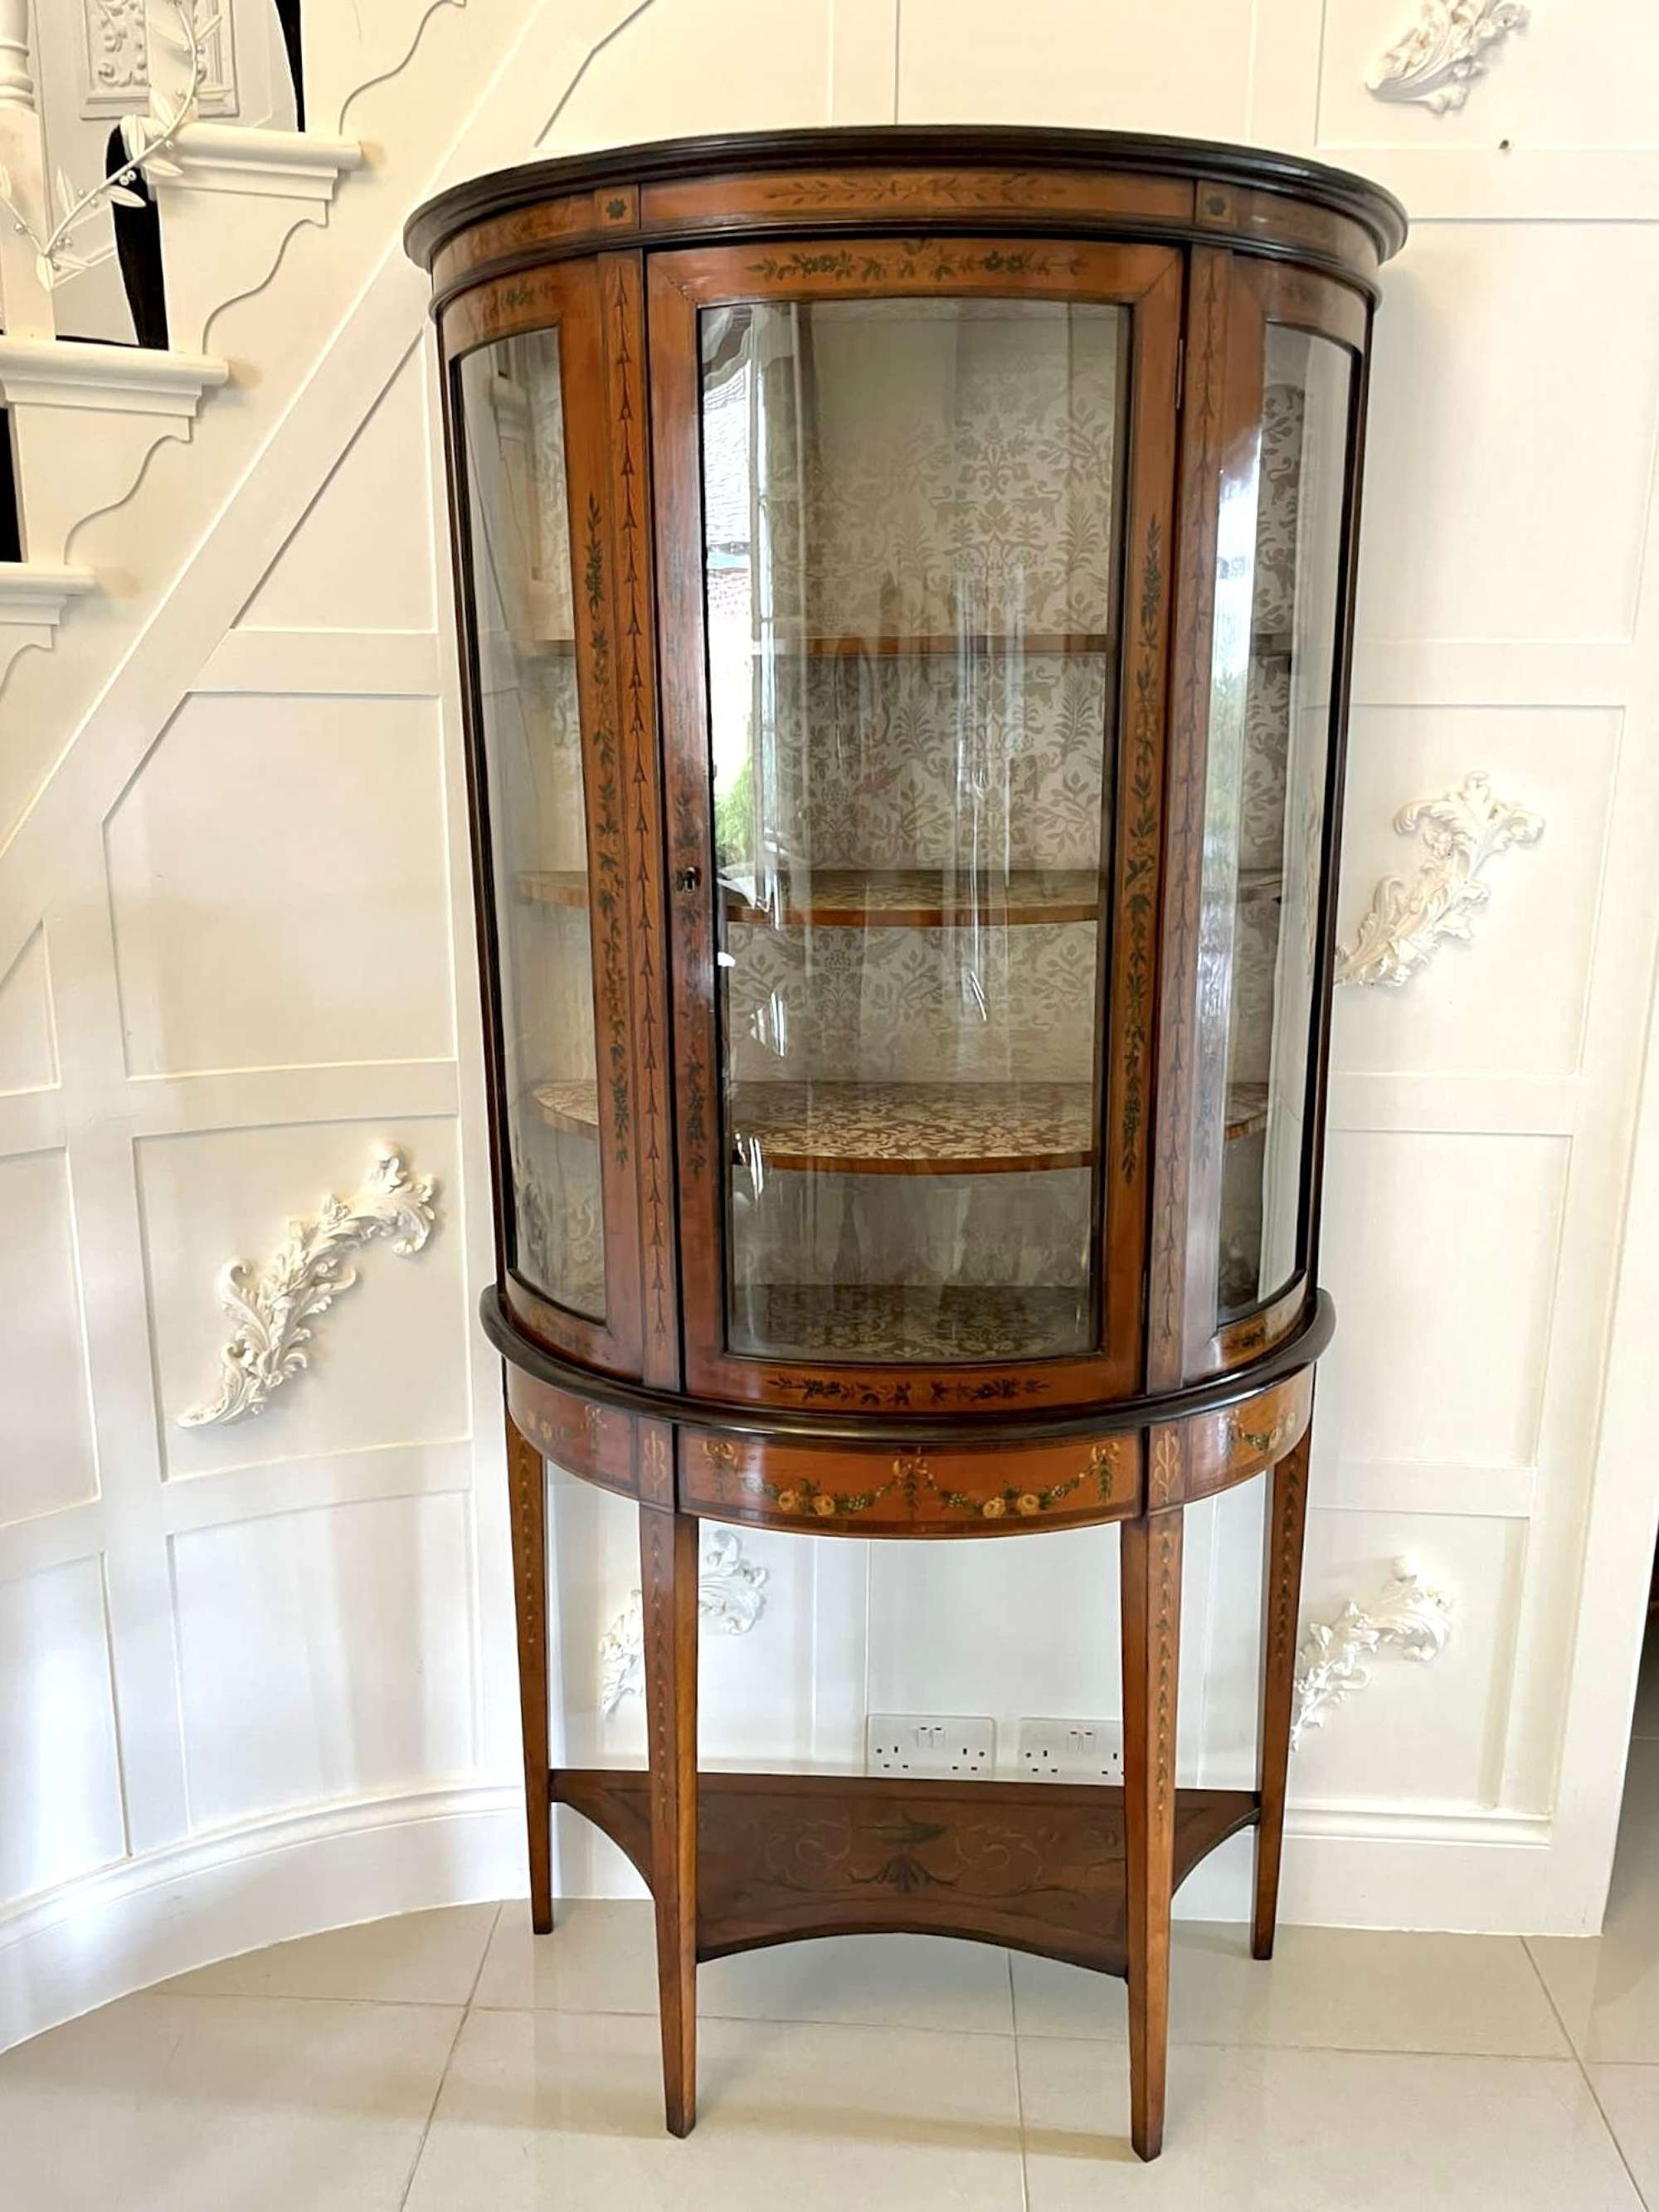 Fine Quality Antique Victorian Satinwood Display Cabinet with Original Painted Decoration